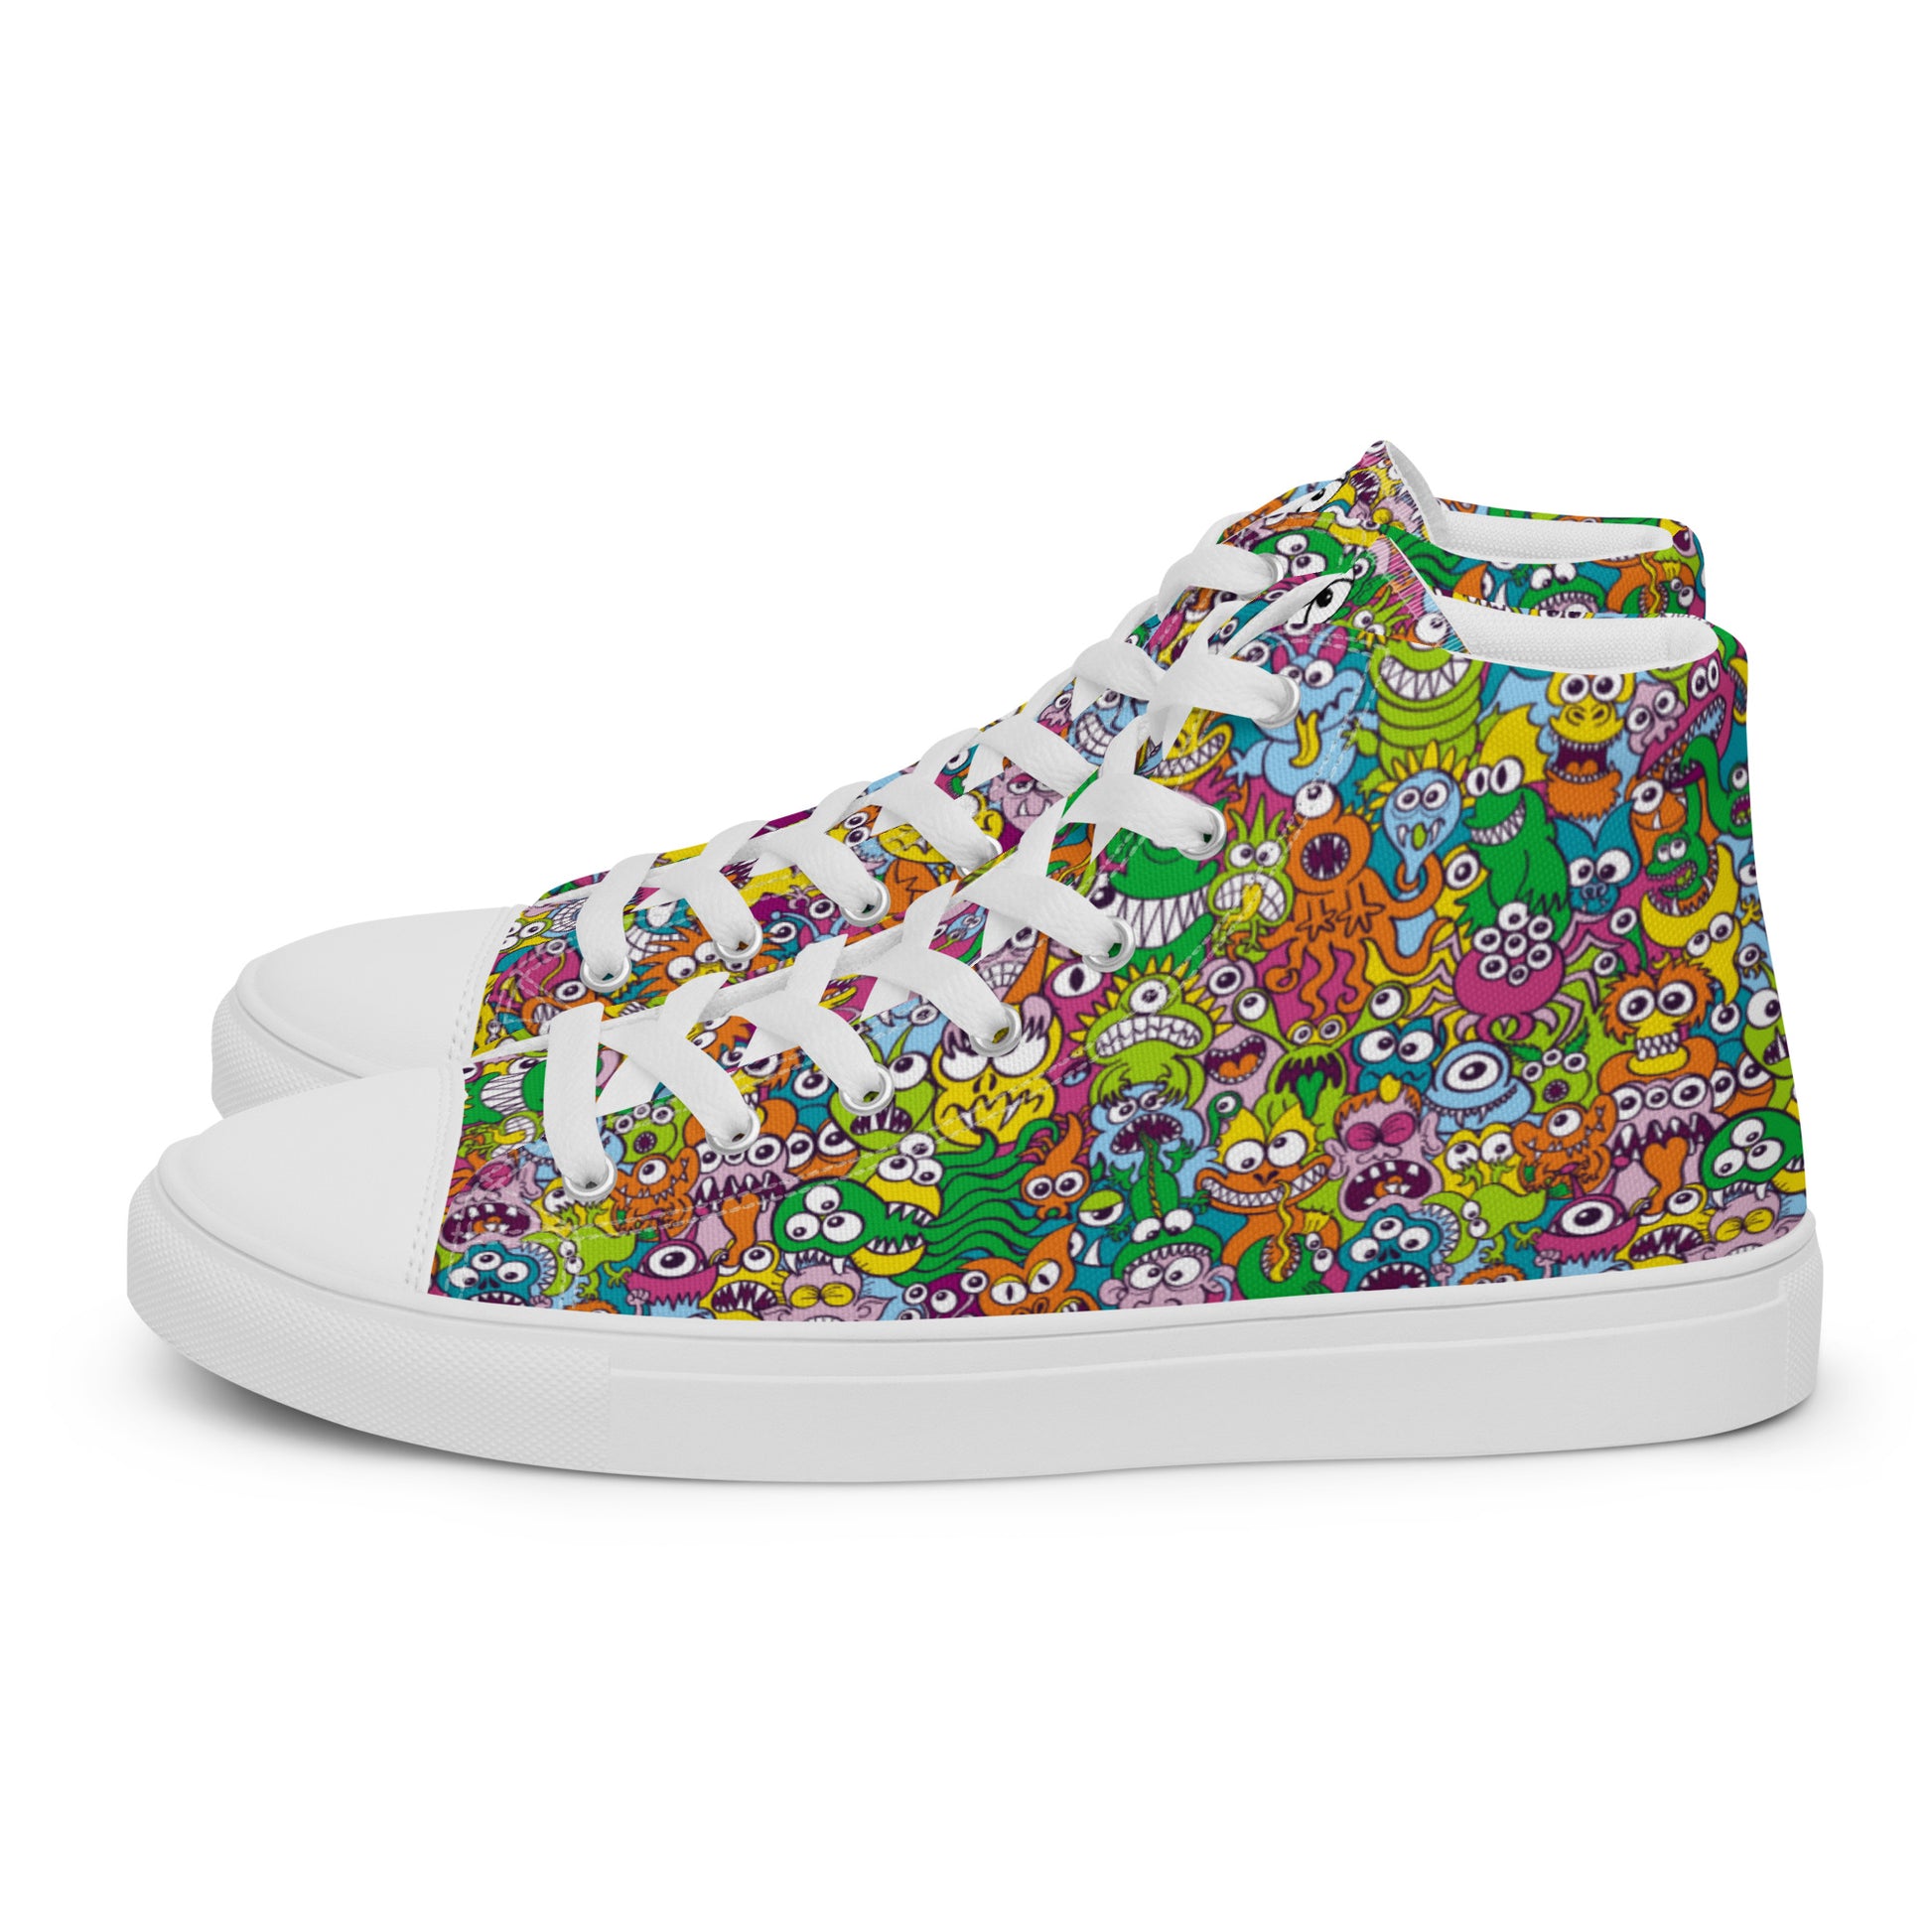 Terrific Halloween creatures ready for a horror movie Men’s high top canvas shoes. Side view